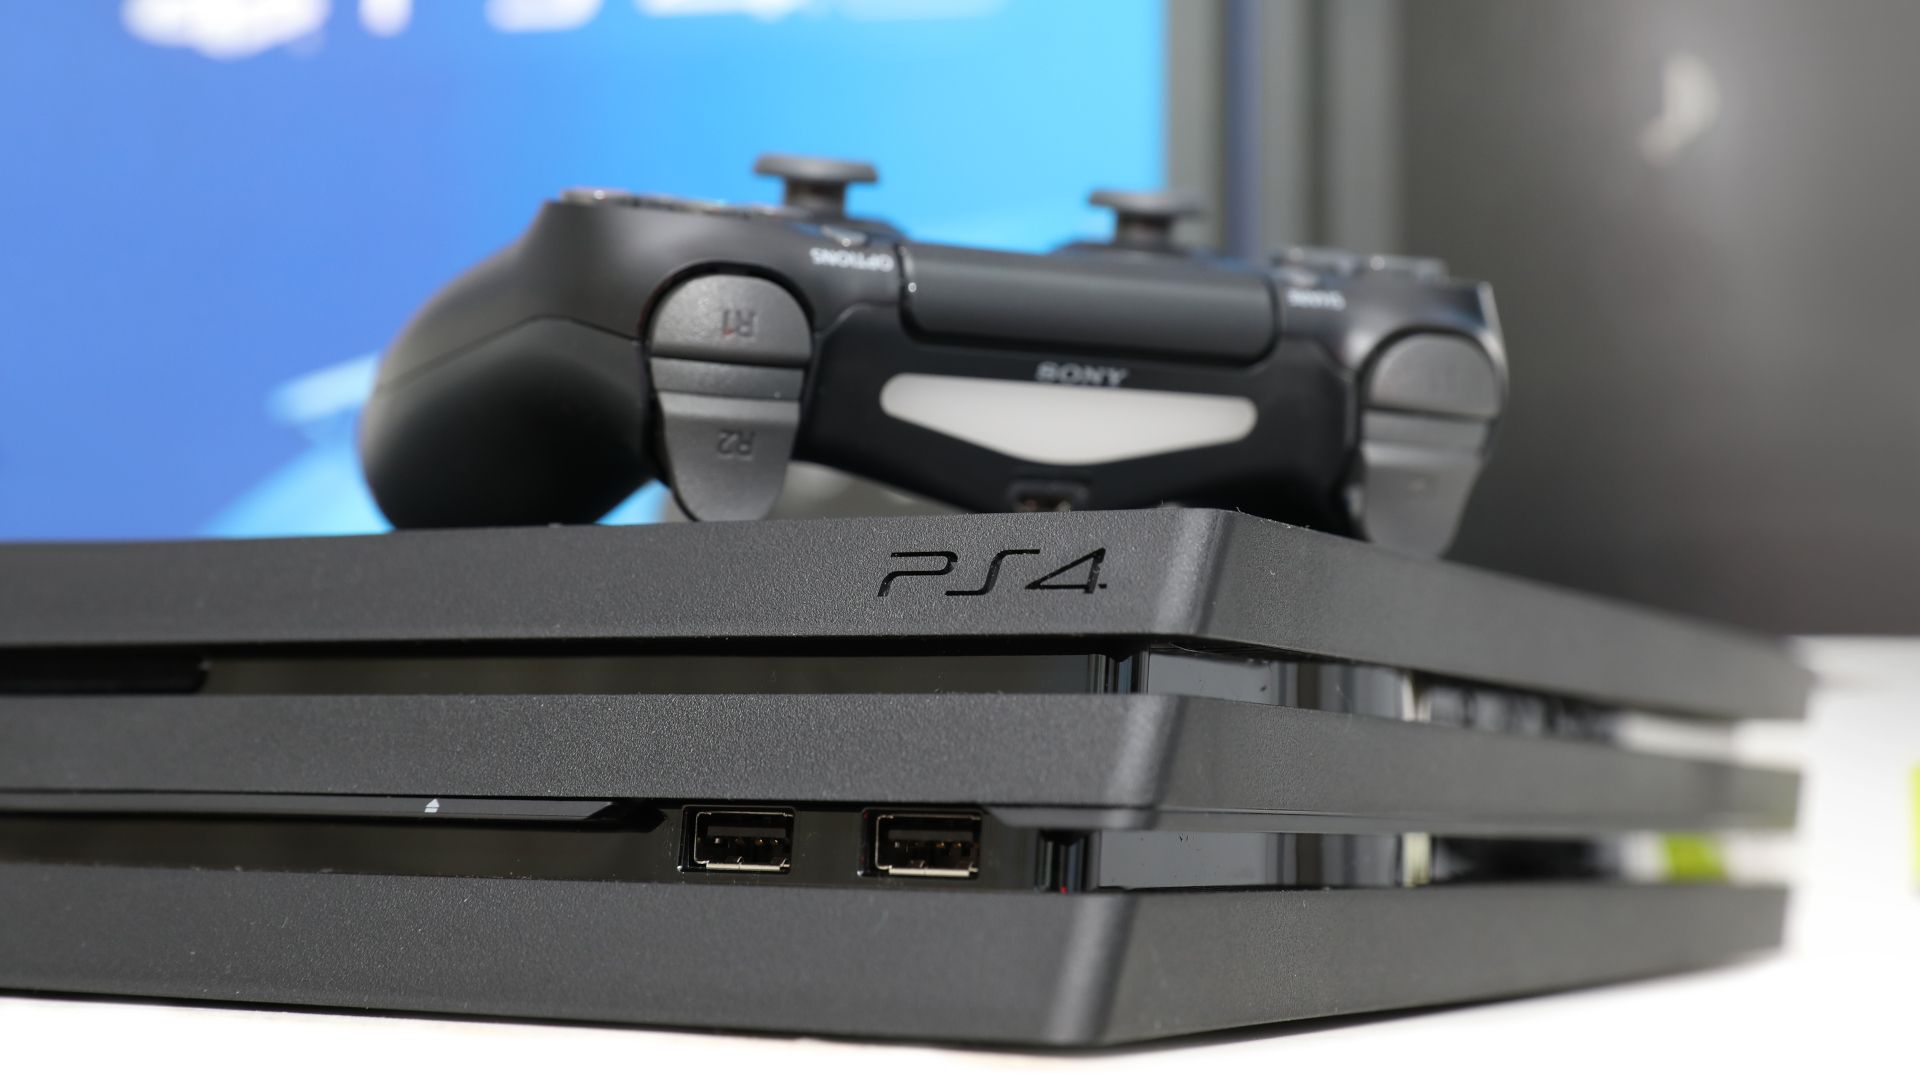 Sony Dualshock Controller with PlayStation 4 Pro.